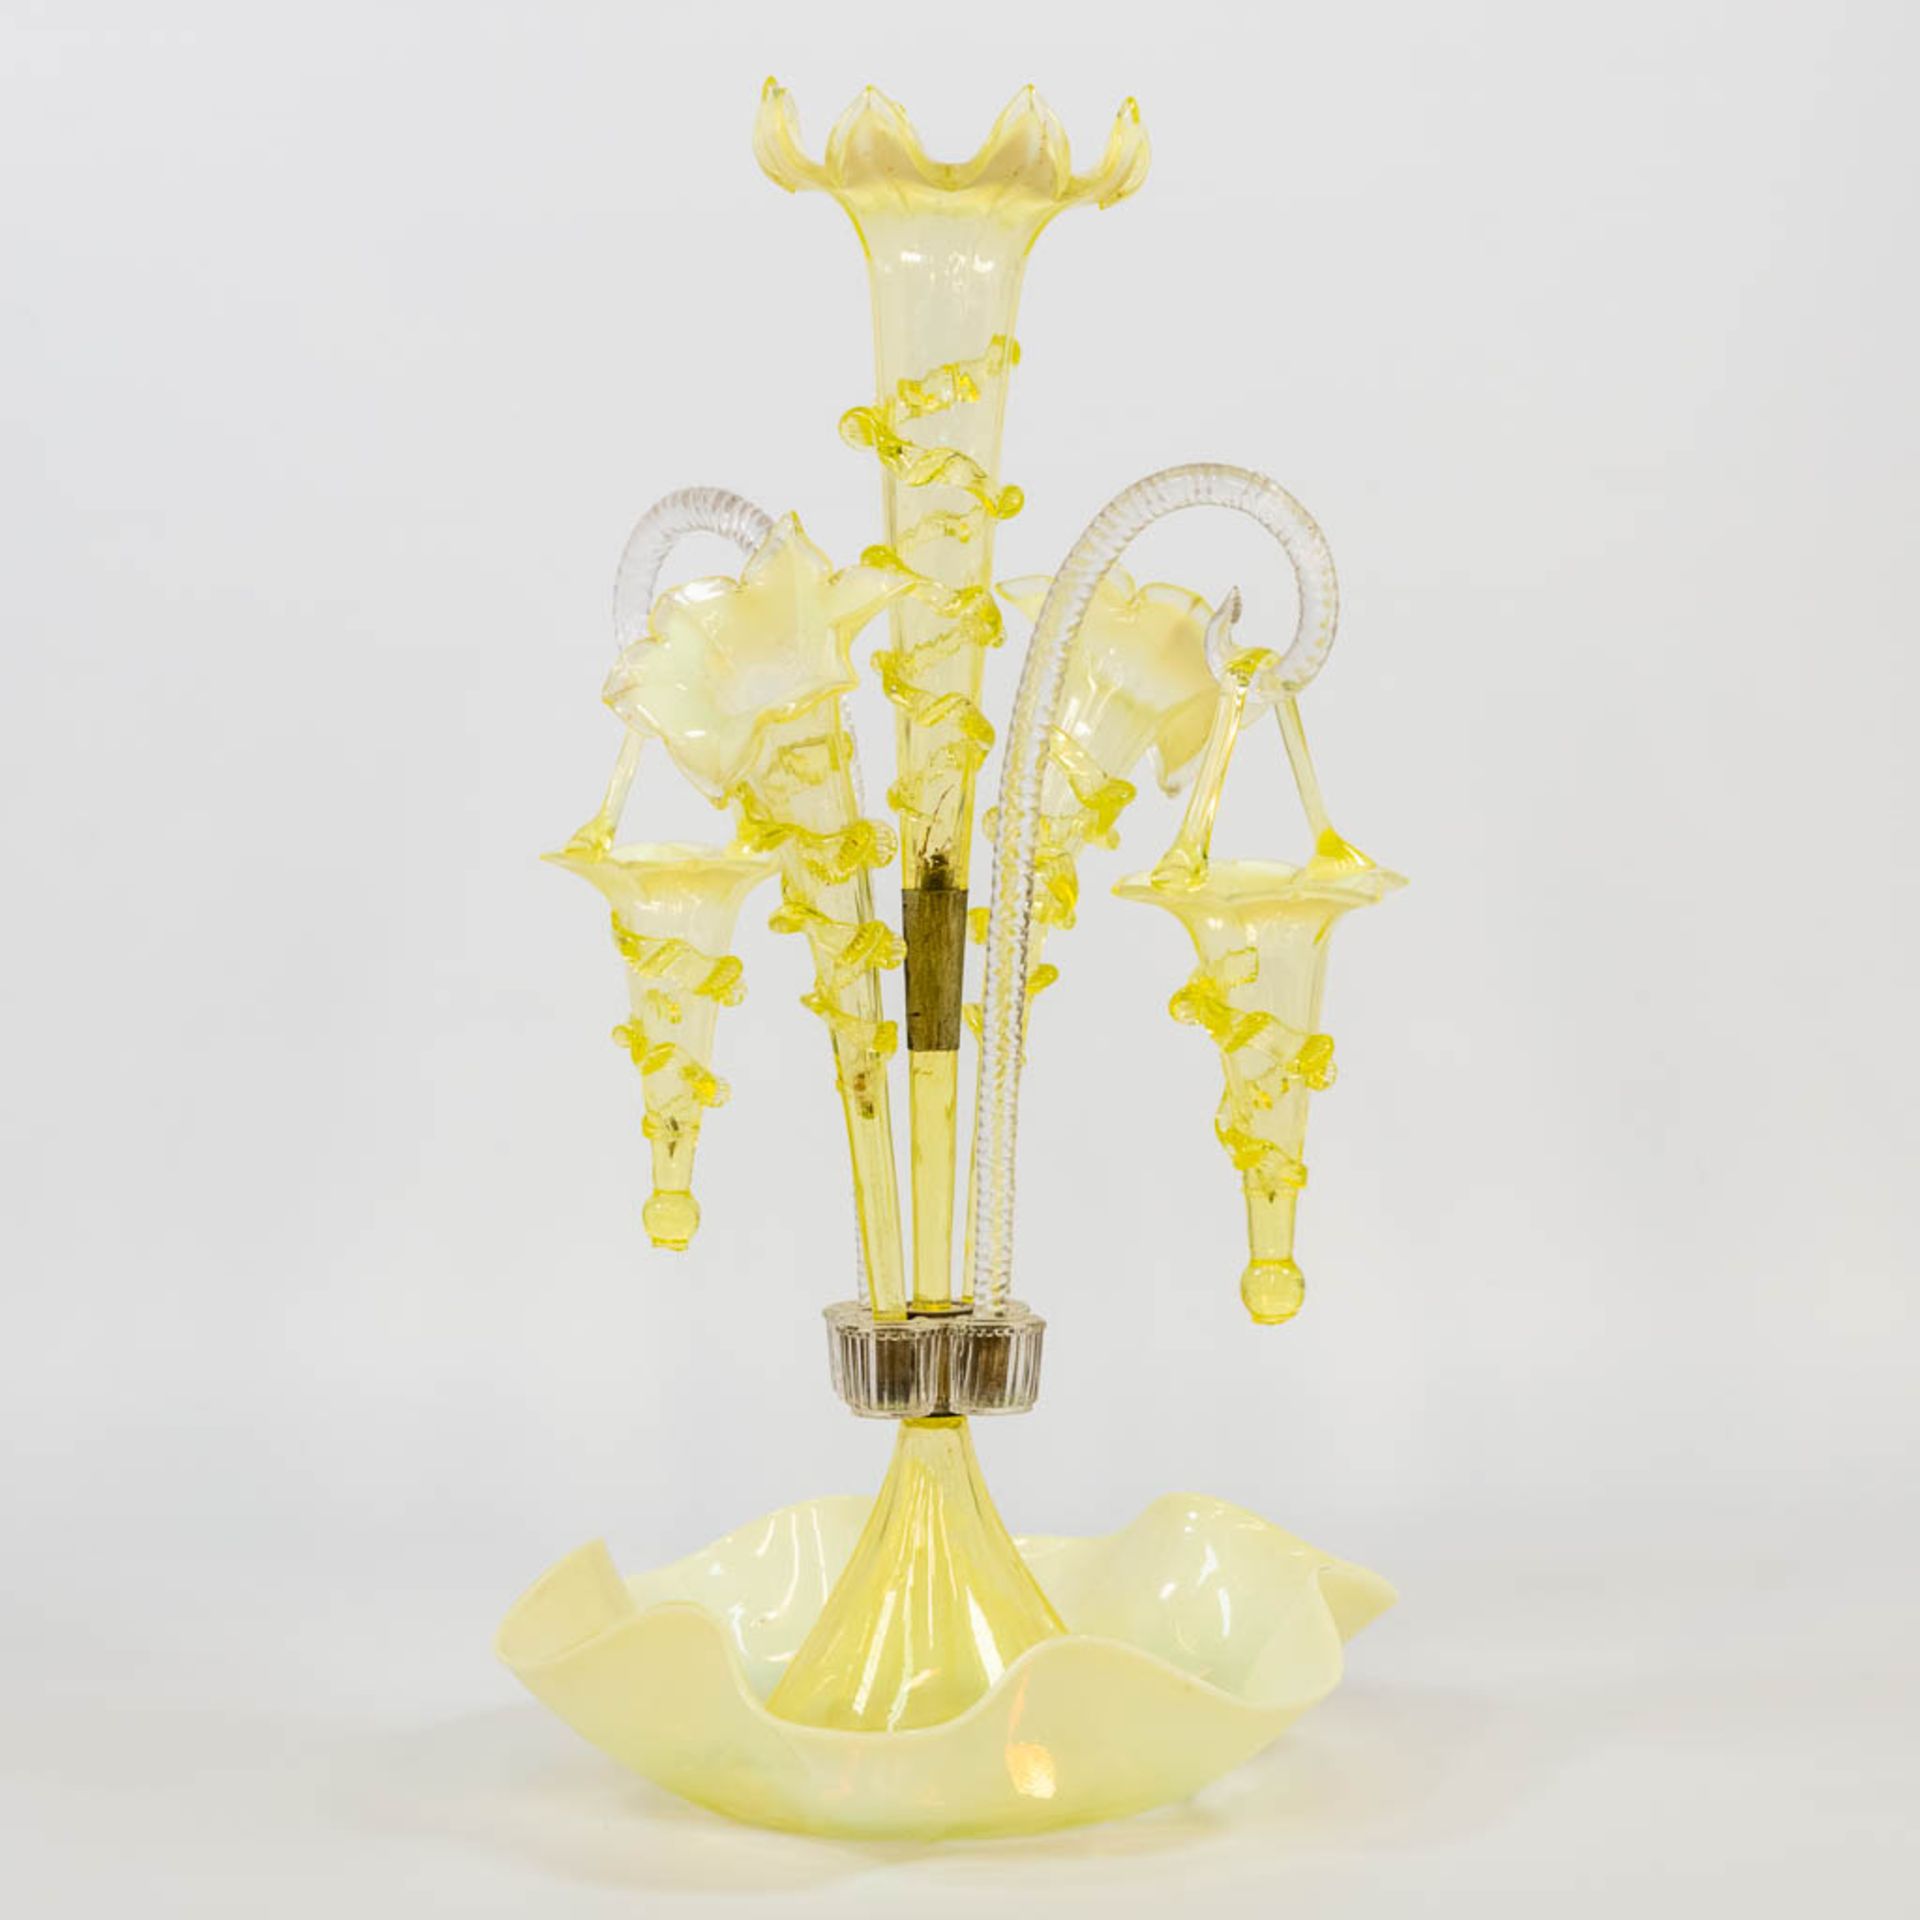 A yellow and clear glass table centrepiece pic-fleur, made in Murano, Italy. (25 x 28 x 45 cm) - Bild 7 aus 15